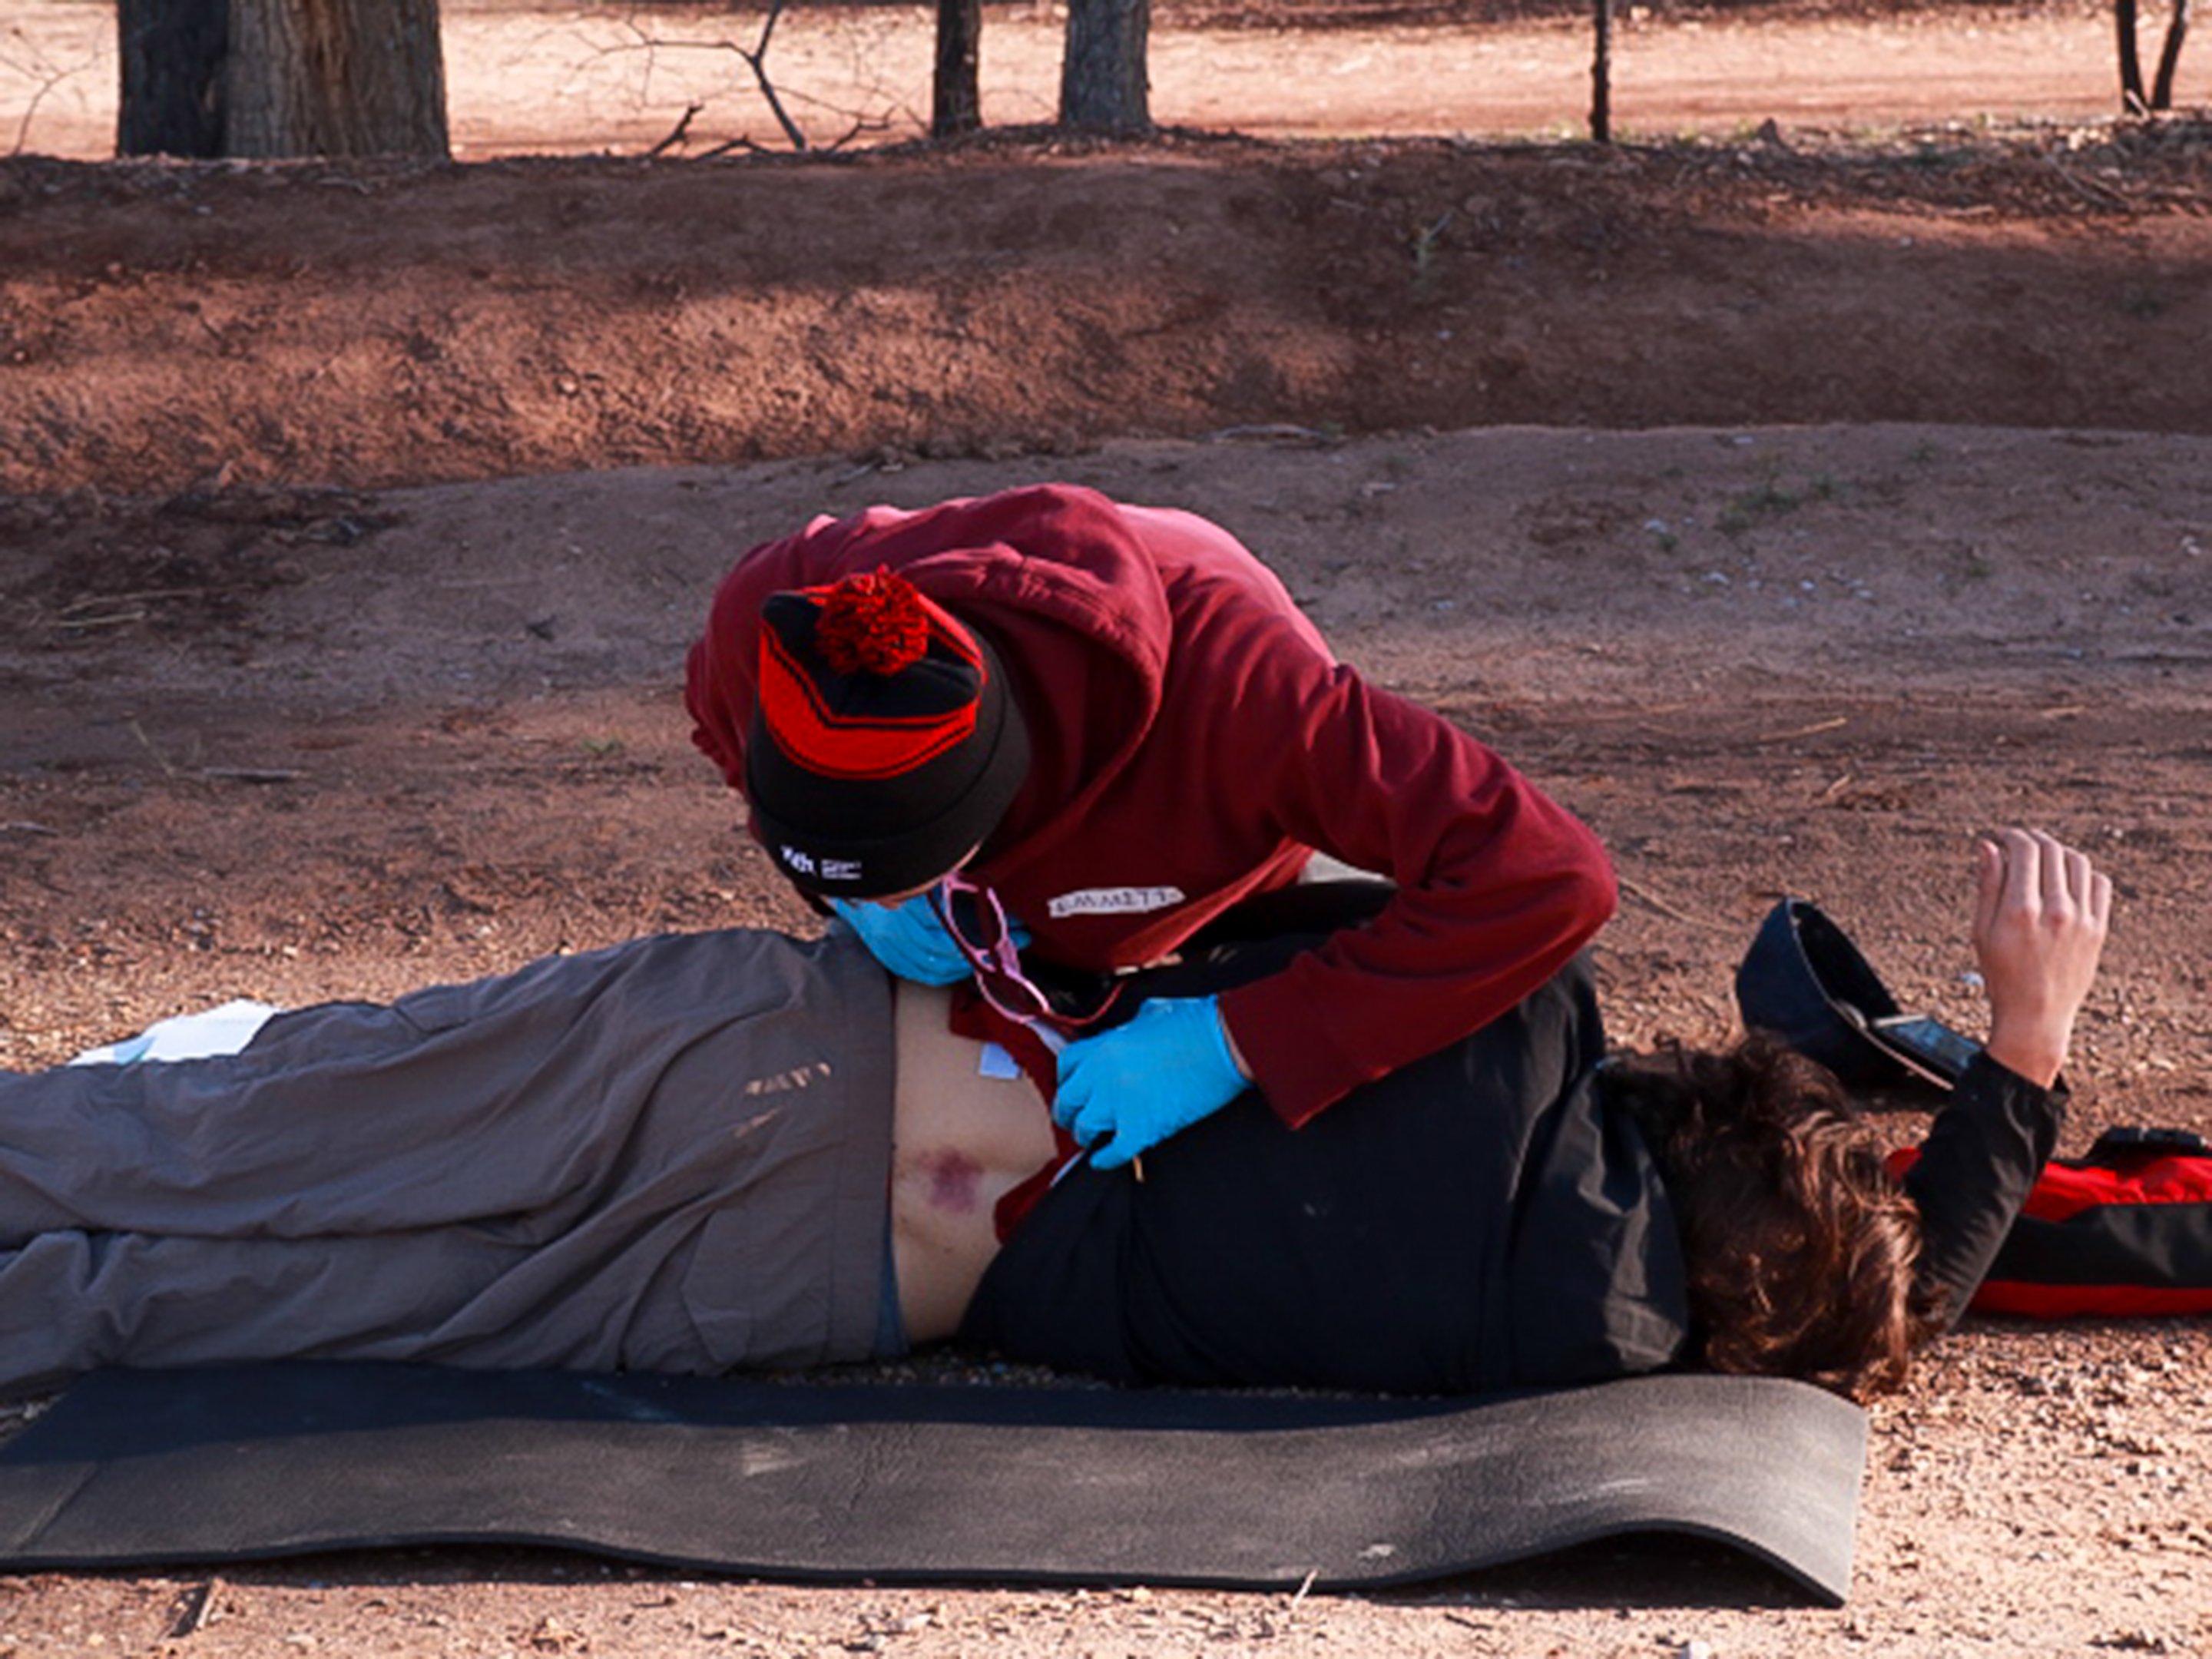 A rescuer log rolls a patient to check his bruised spine.